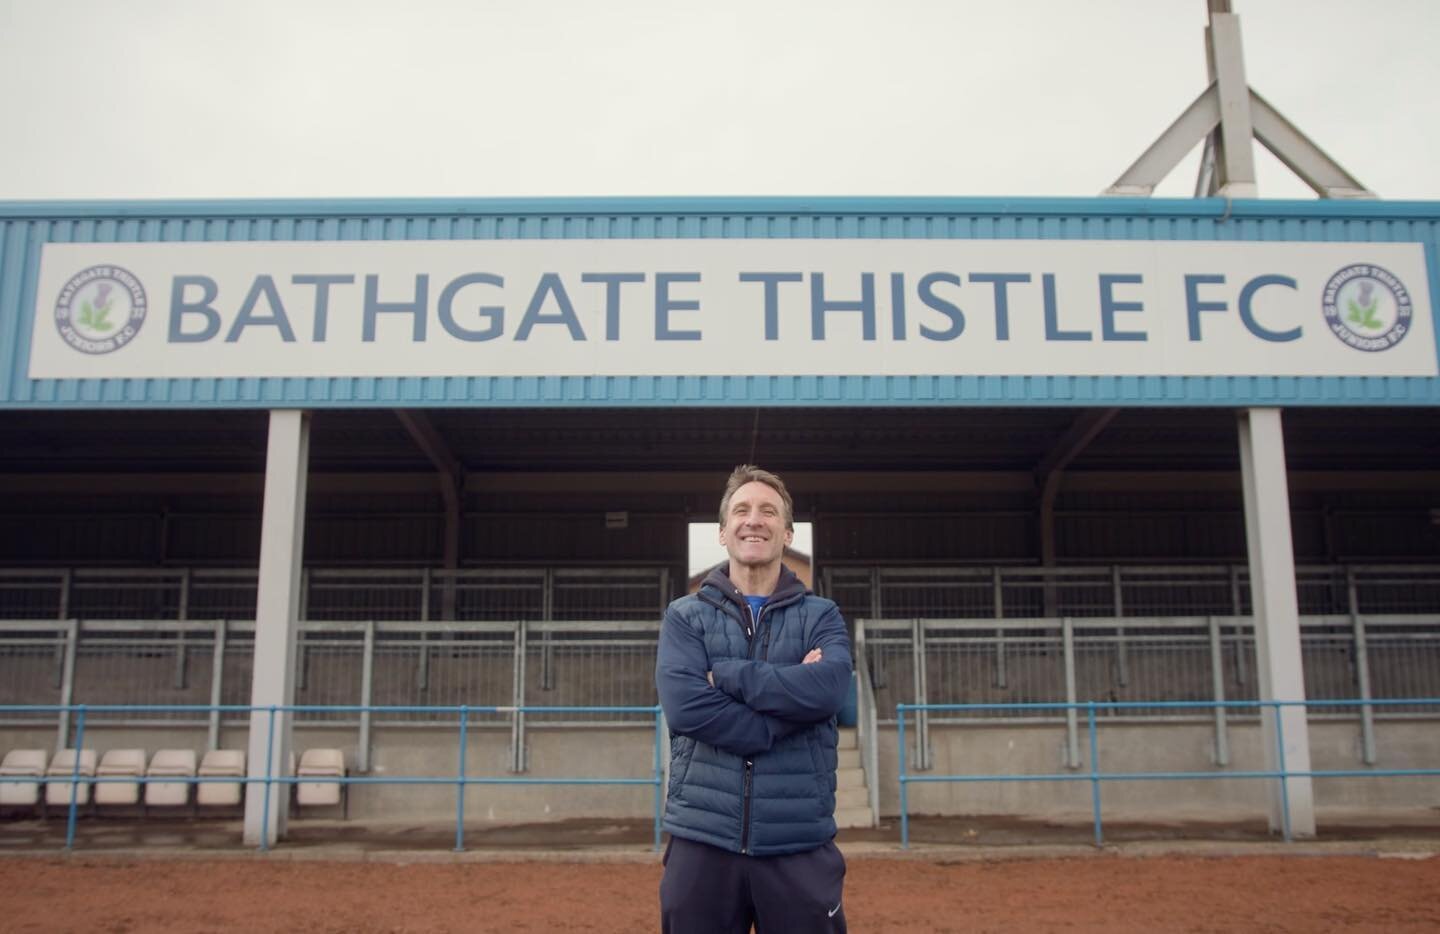 N E W  W O R K for @aviewfromtheterracegram 🎥

54 Summers tells the story of Darrell Drew of Bathgate Thistle who after 54 years of bossing it on the pitch has zero interest in hanging up his boots. Loved directing this piece and working alongside t